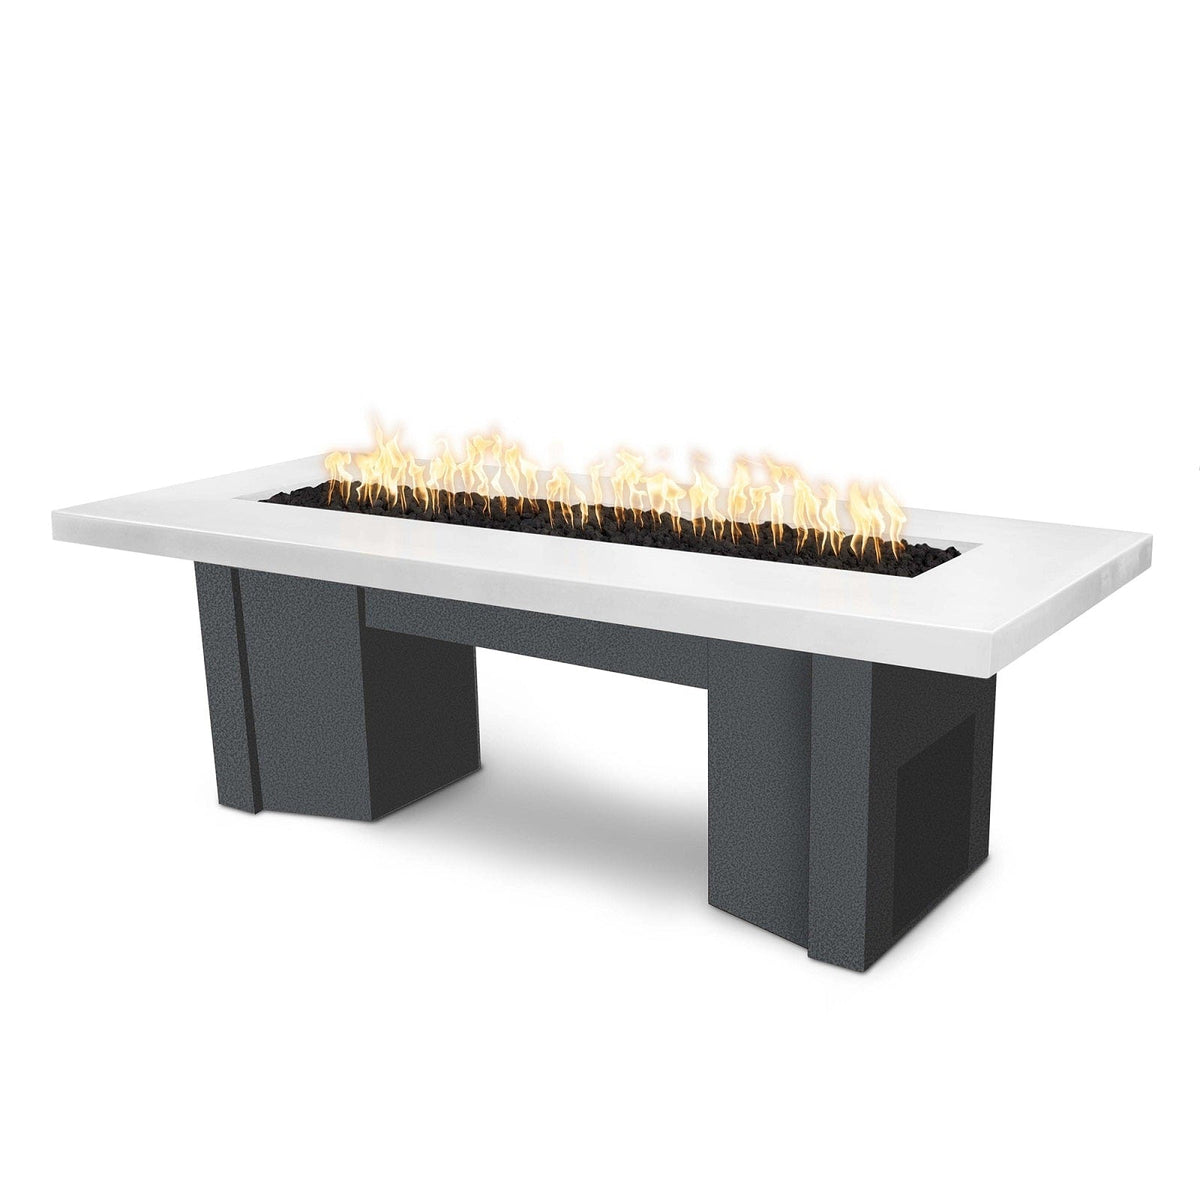 The Outdoor Plus Fire Features Limestone (-LIM) / Silver Vein Powder Coated Steel (-SLV) The Outdoor Plus 78&quot; Alameda Fire Table Smooth Concrete in Natural Gas - Match Lit with Flame Sense System / OPT-ALMGFRC78FSML-NG